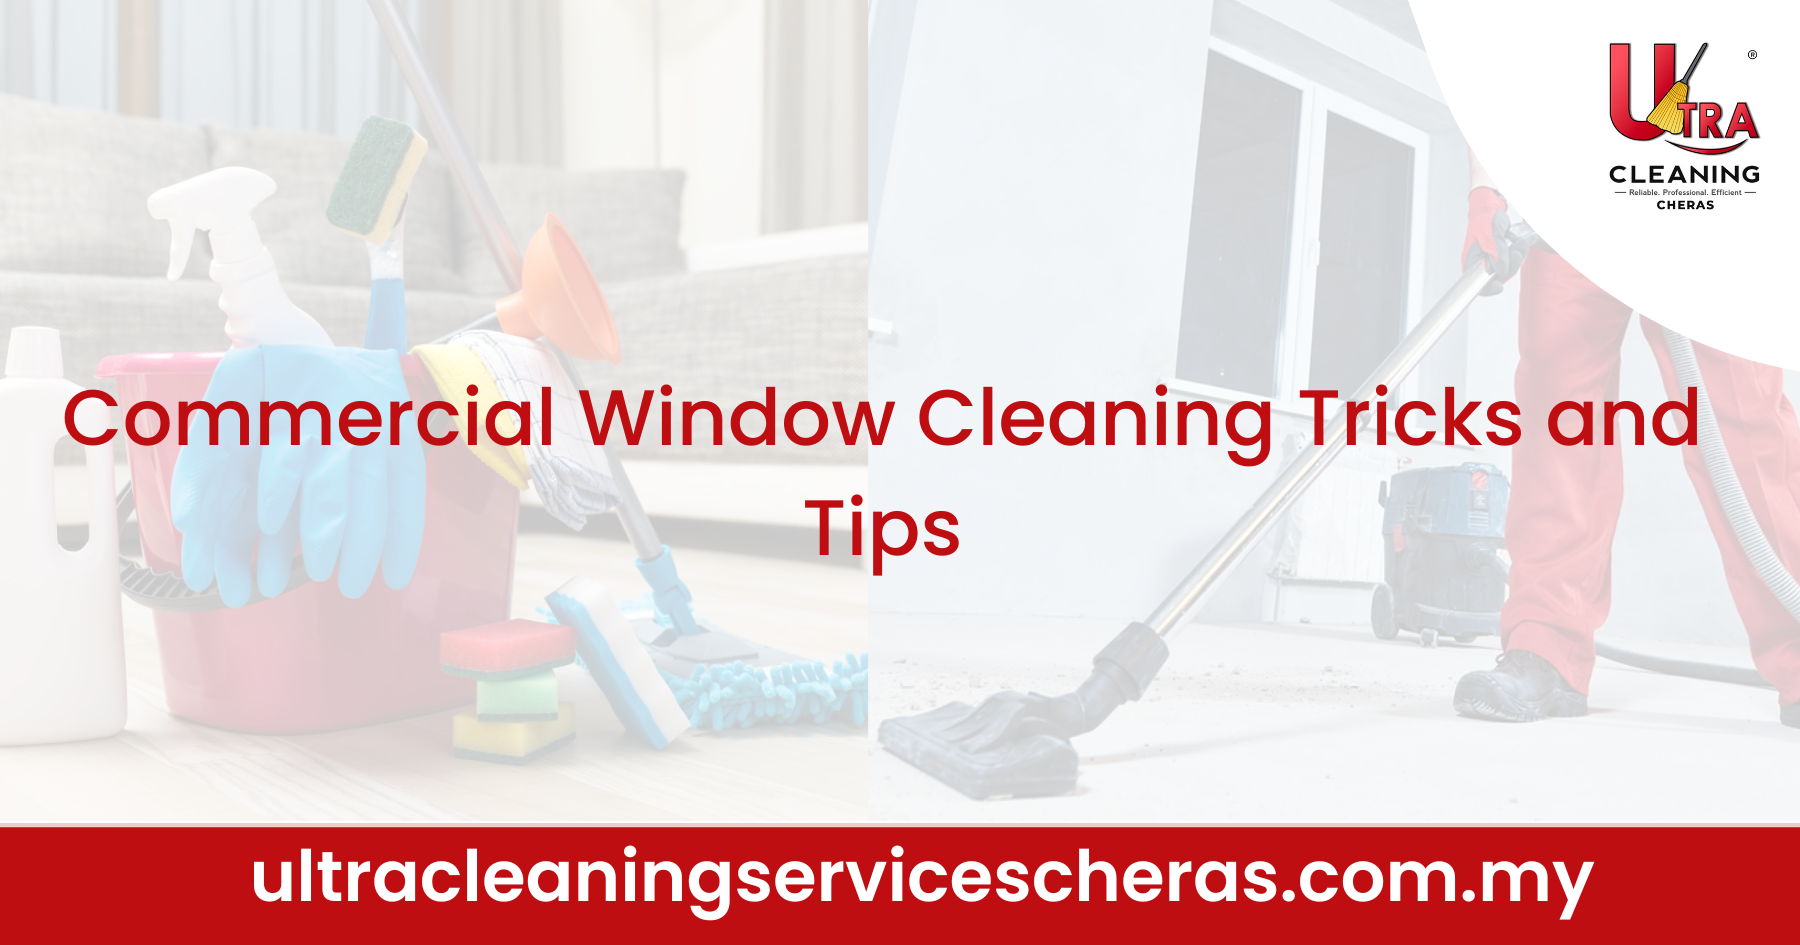 Commercial Window Cleaning Tricks and Tips